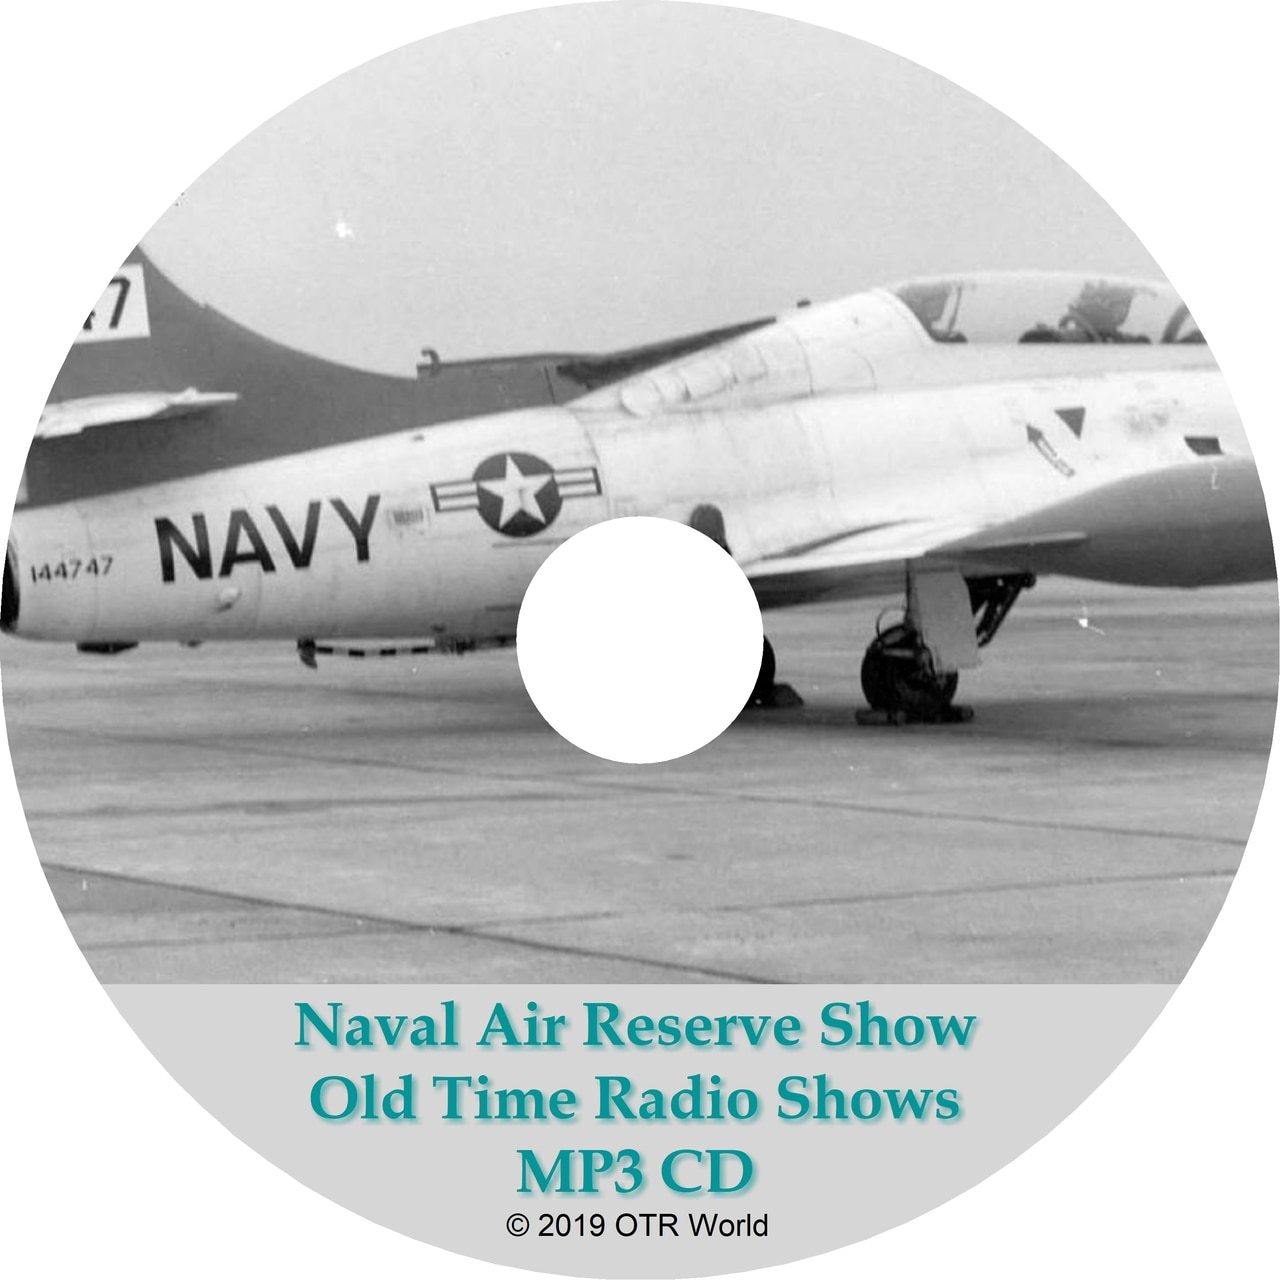 Naval Air Reserve Show Old Time Radio Shows 2 Episodes On MP3 CD OTR OTRS - OTR World